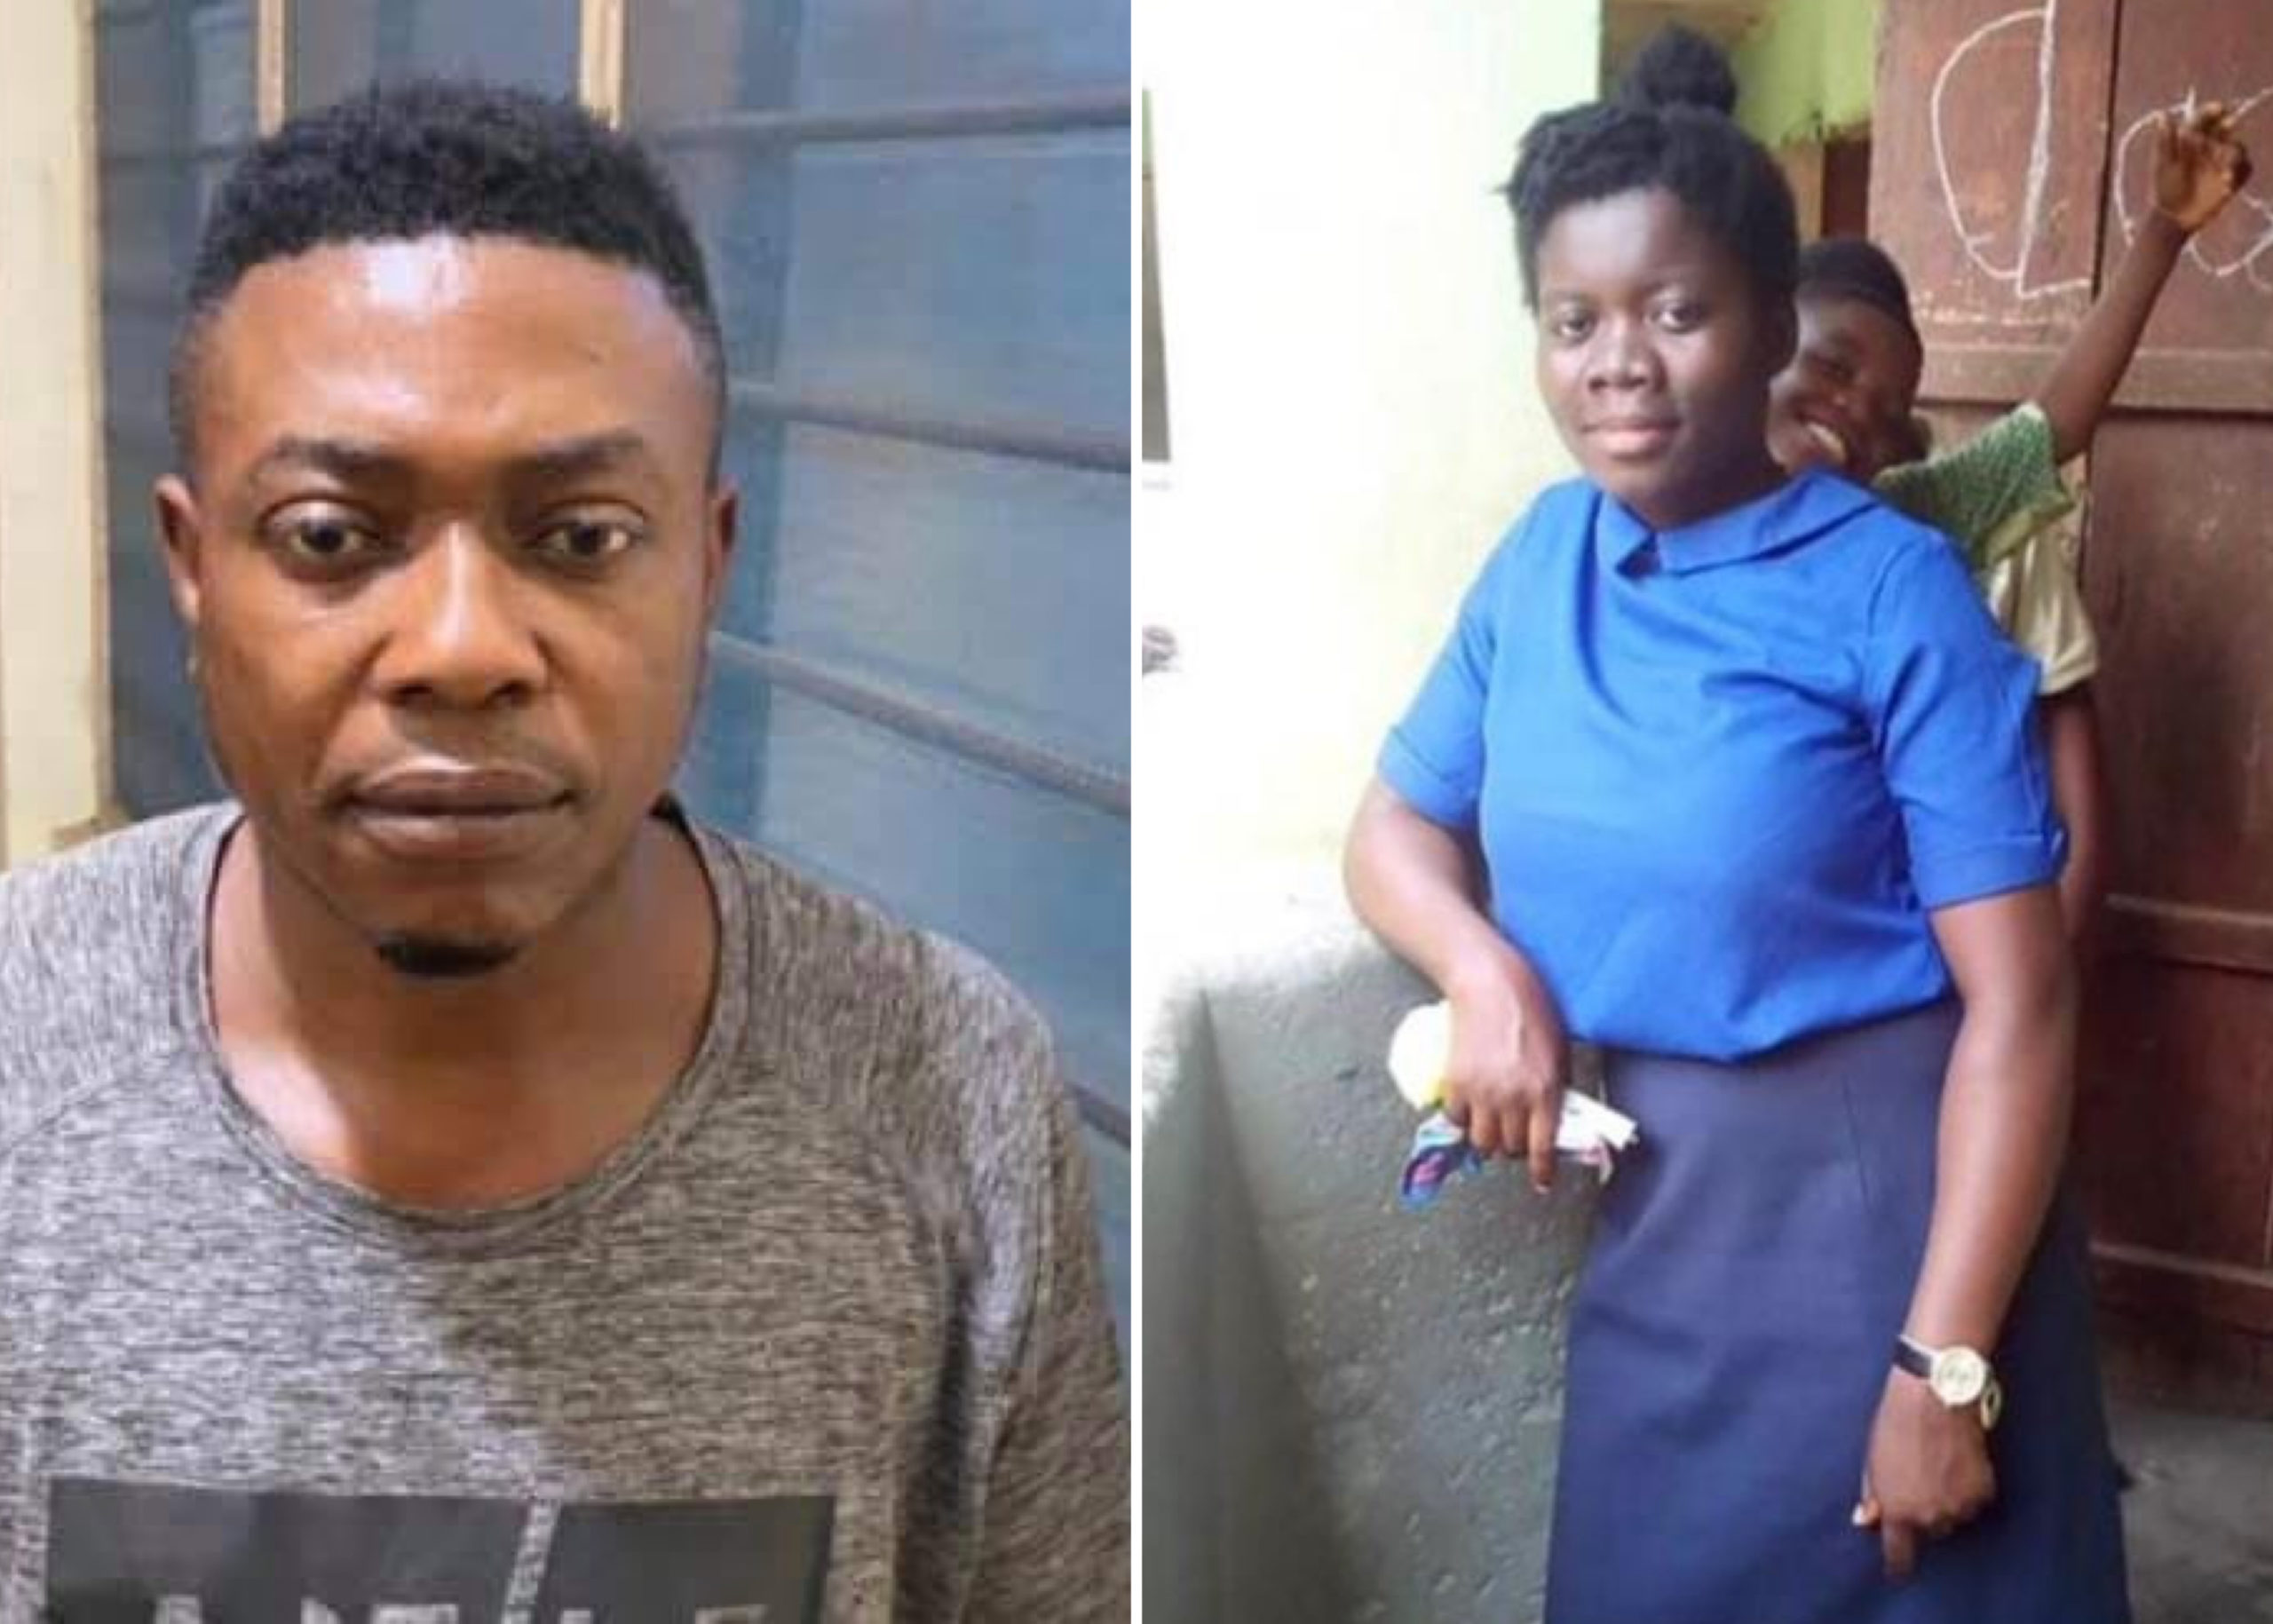 Nigerian Man Charged With Murder In Ghana After Allegedly Knocking Woman Down With Car, Leaving Her To Die In Bush